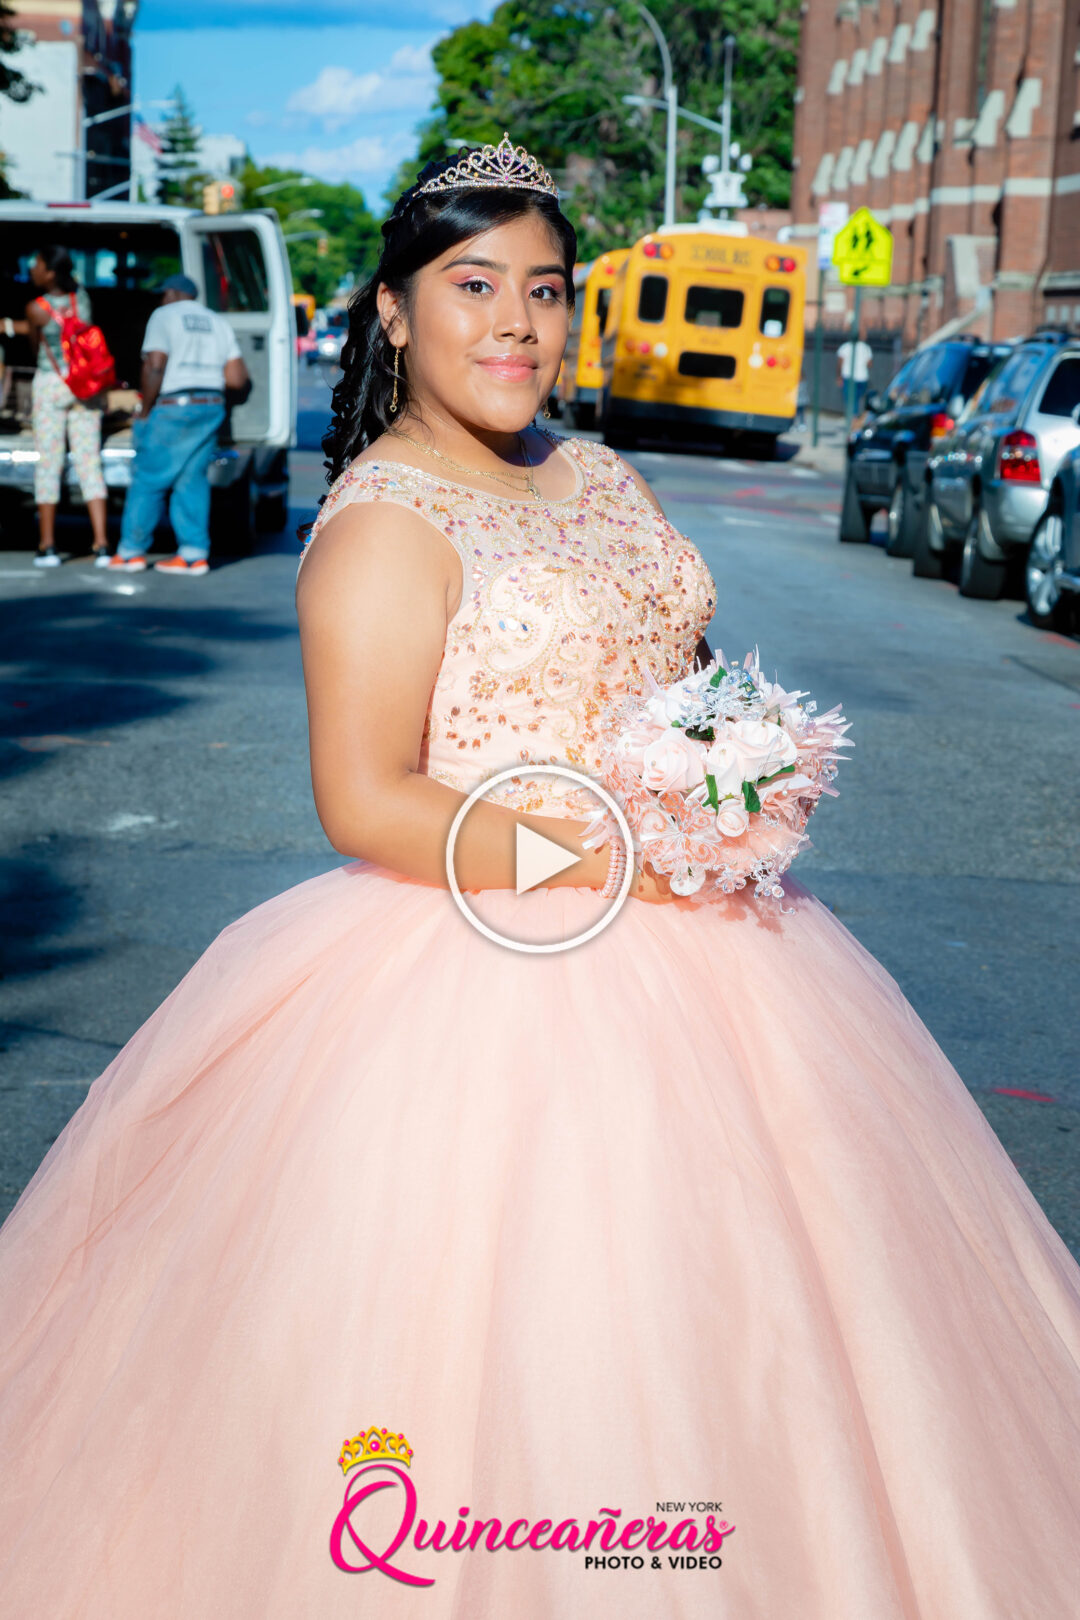 Dresses of quinceanera in New York 